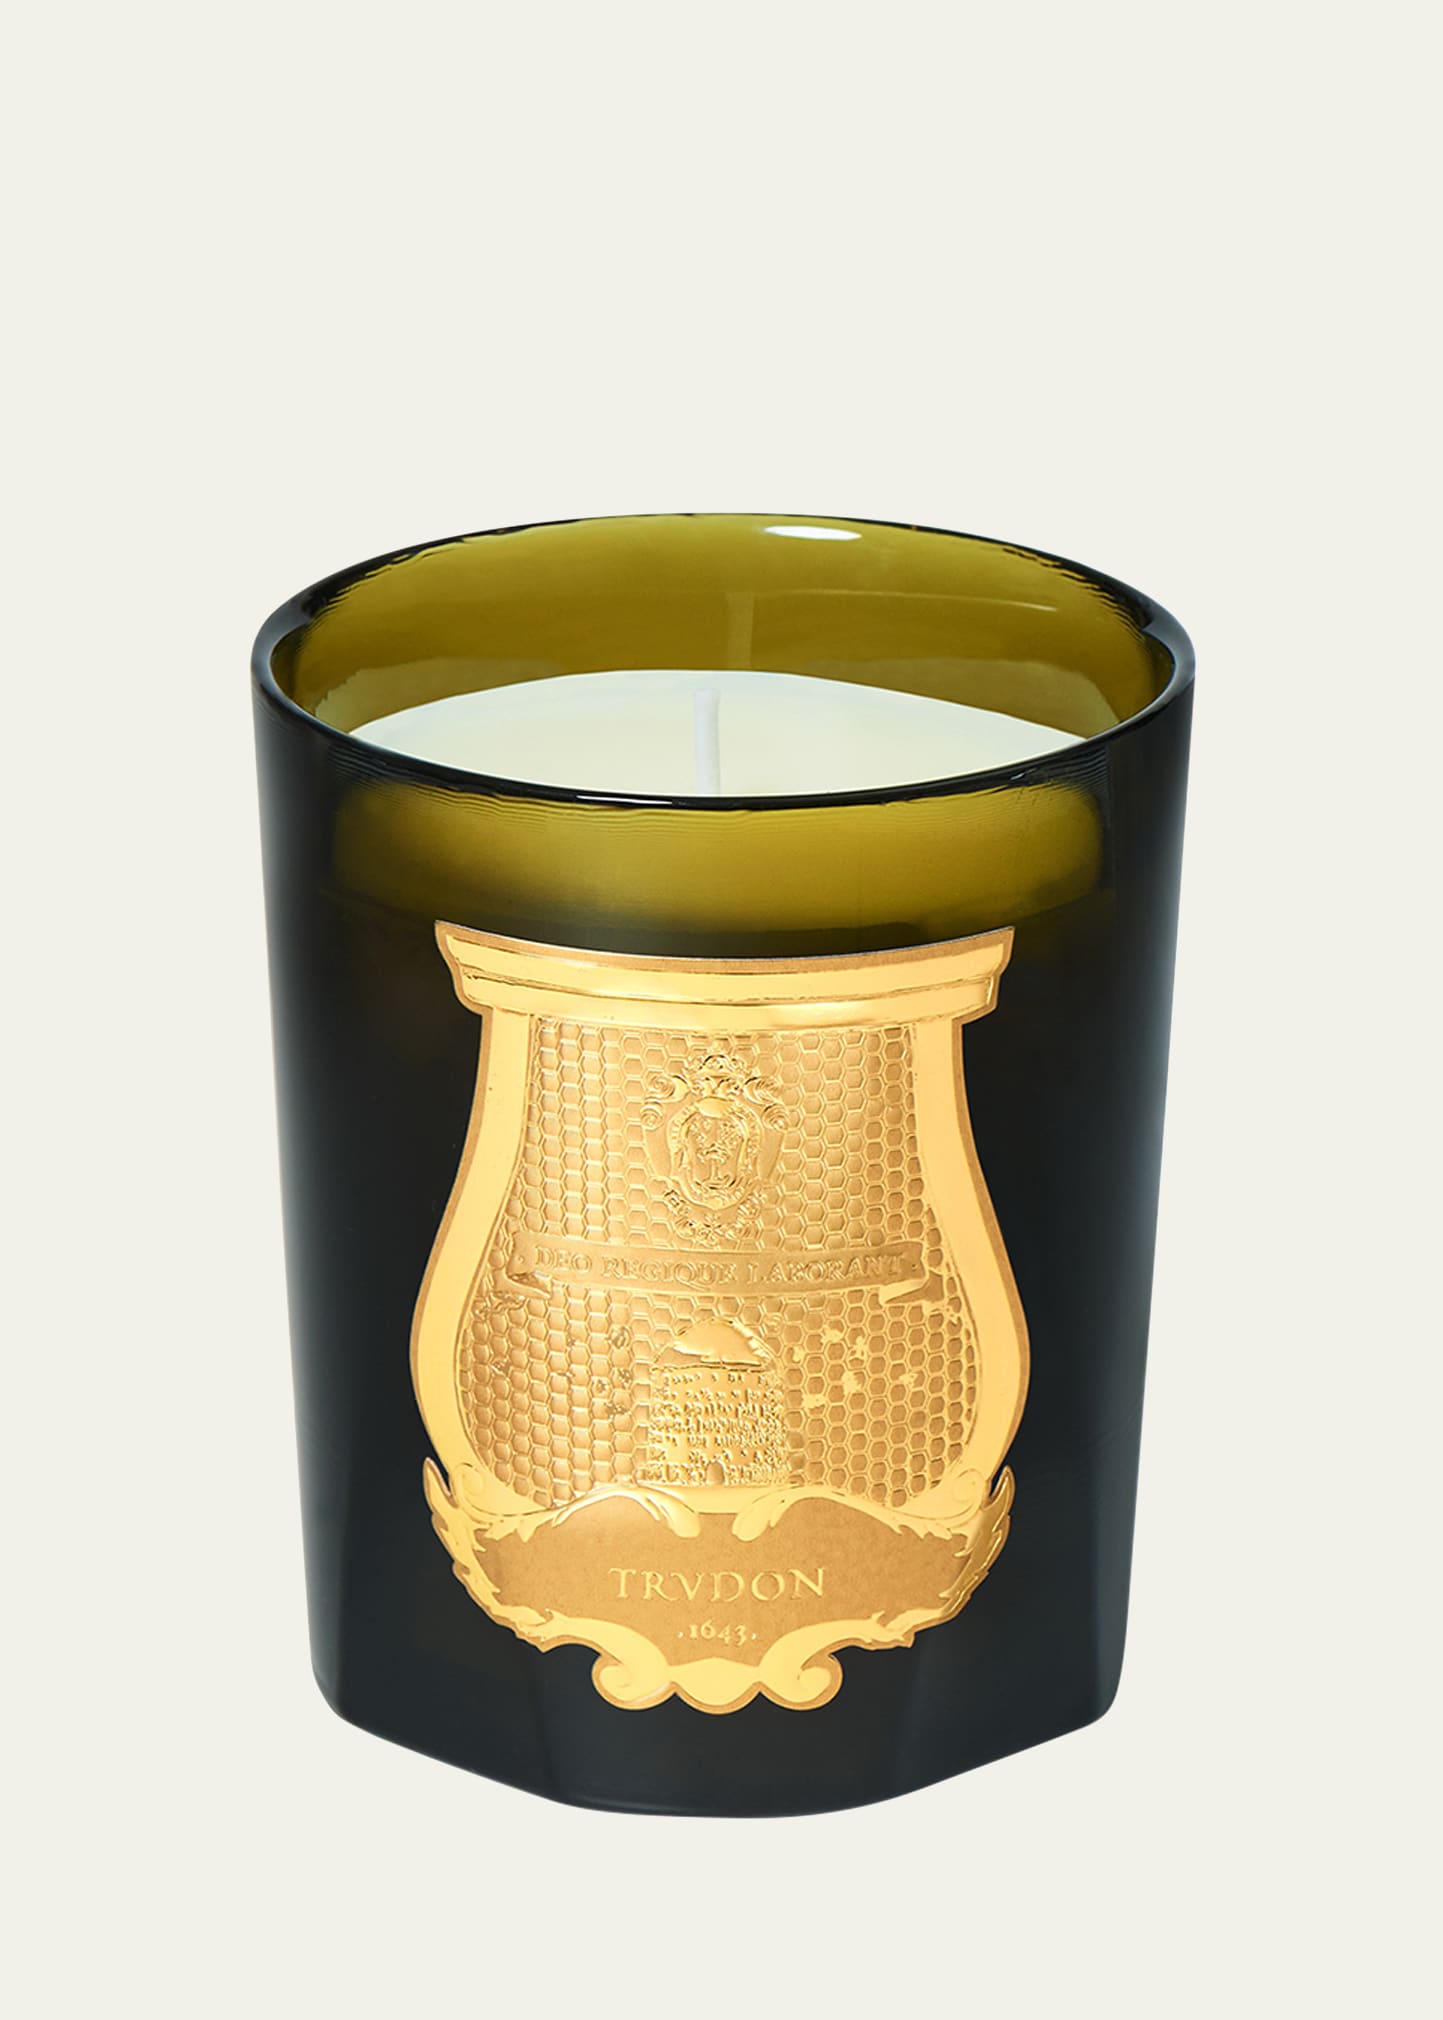 Dada Classic Candle, Tea And Vetiver